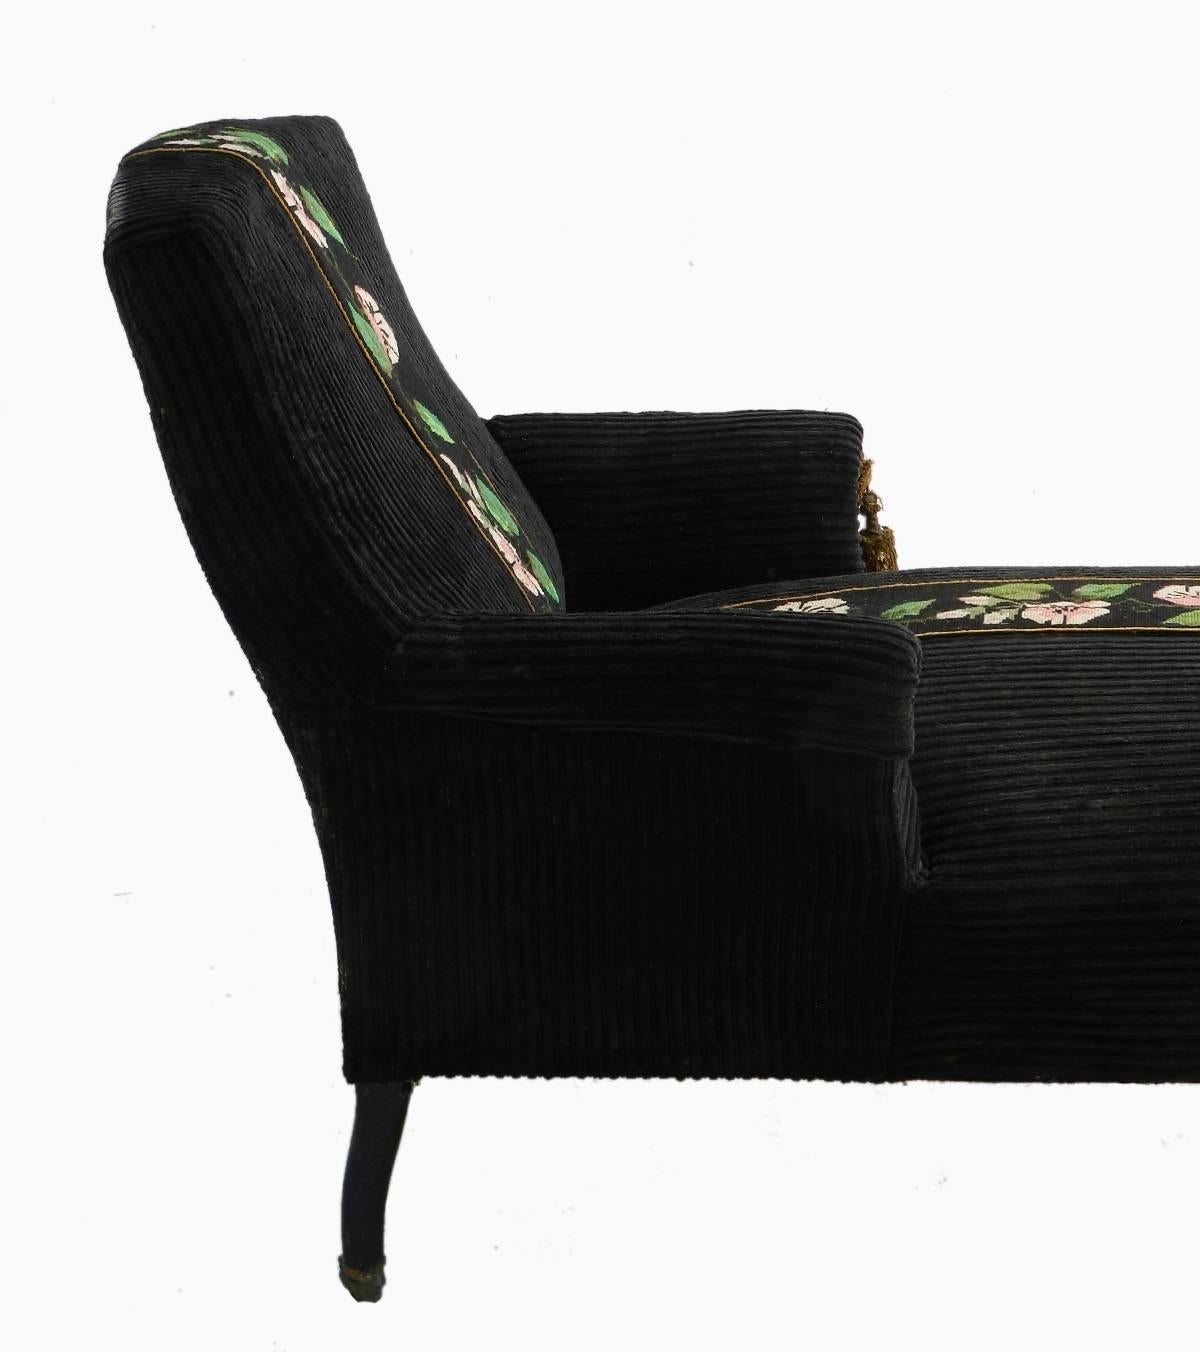 French Napoleon III Chaise longue Meridienne armchair to recover
As removed from a small French Chateau
Ebonised legs
Upholstery in good condition easily recovered to suit your interior please ask for quote if required
Seat height